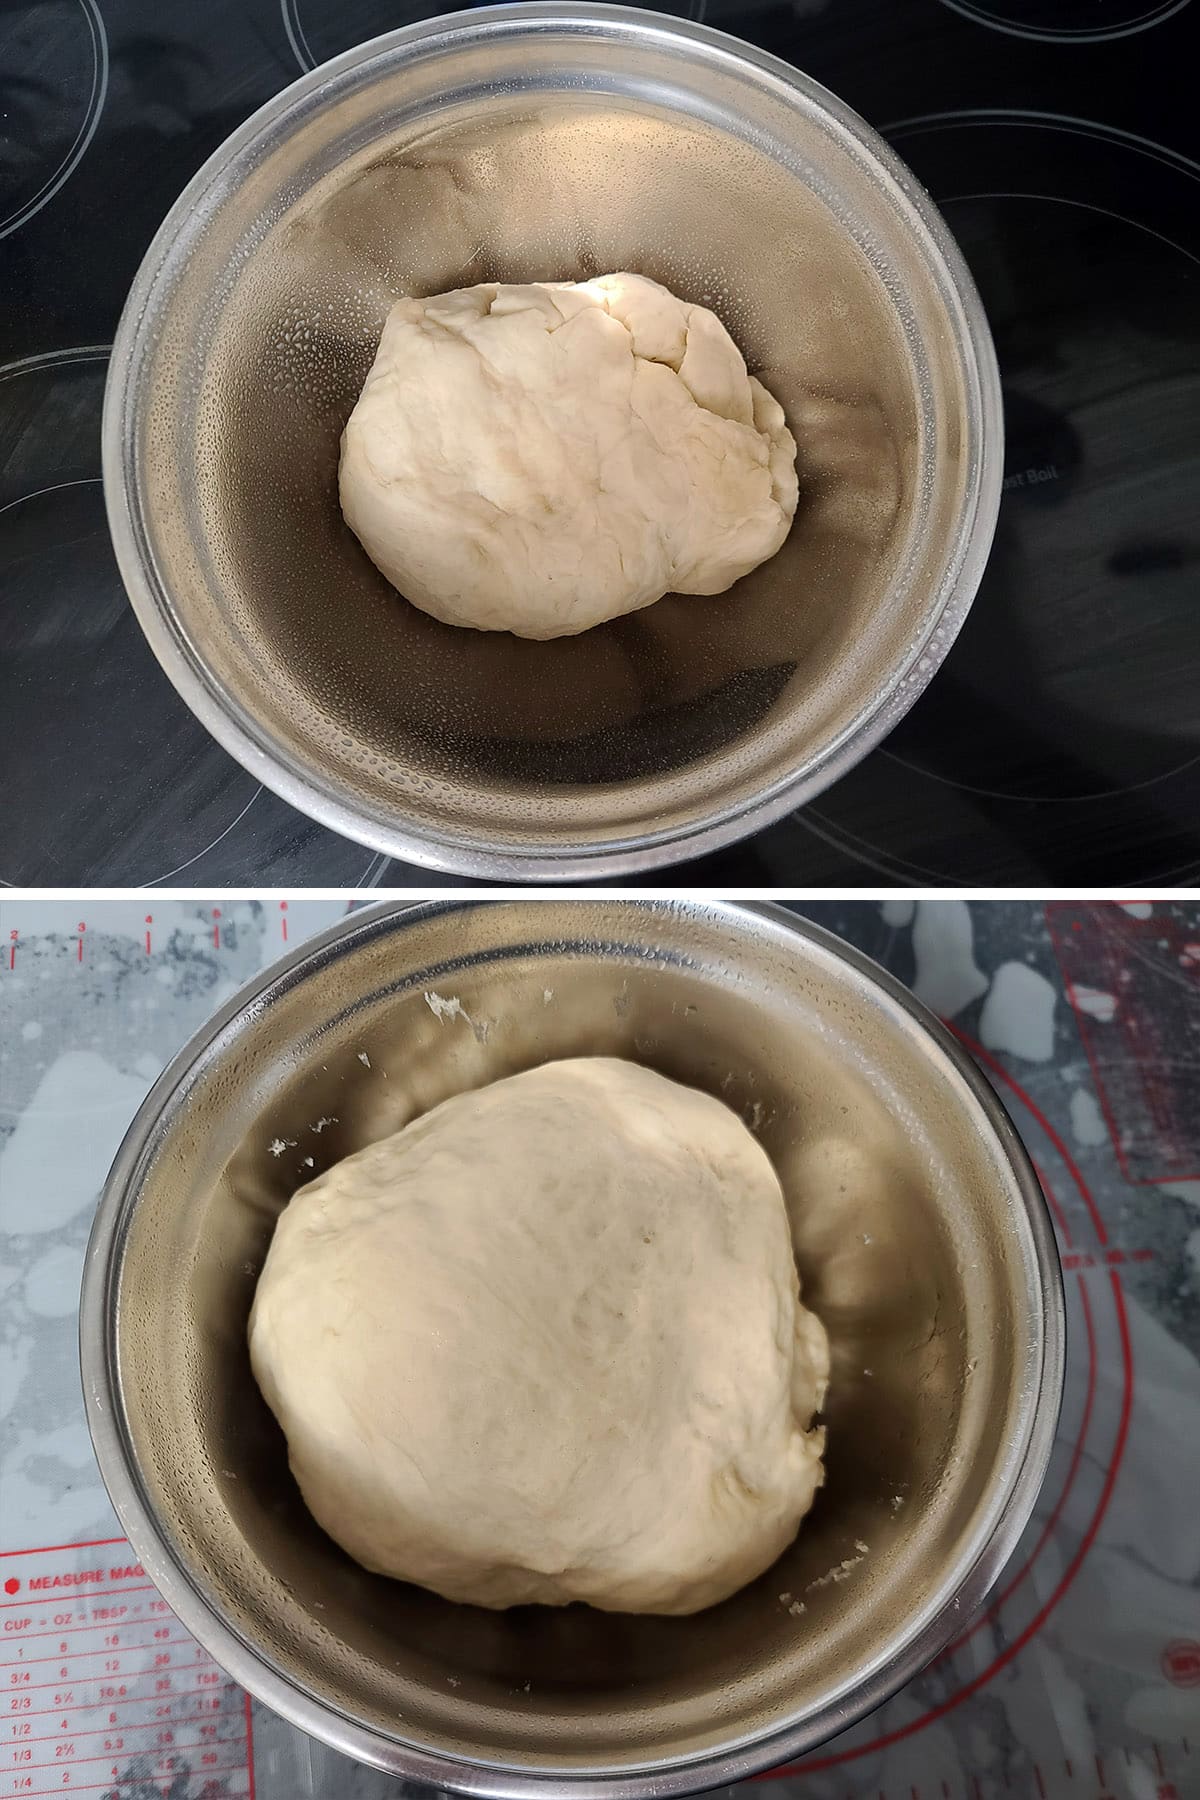 A 2 part image showing the ball of dough in a metal bowl, before and after rising.